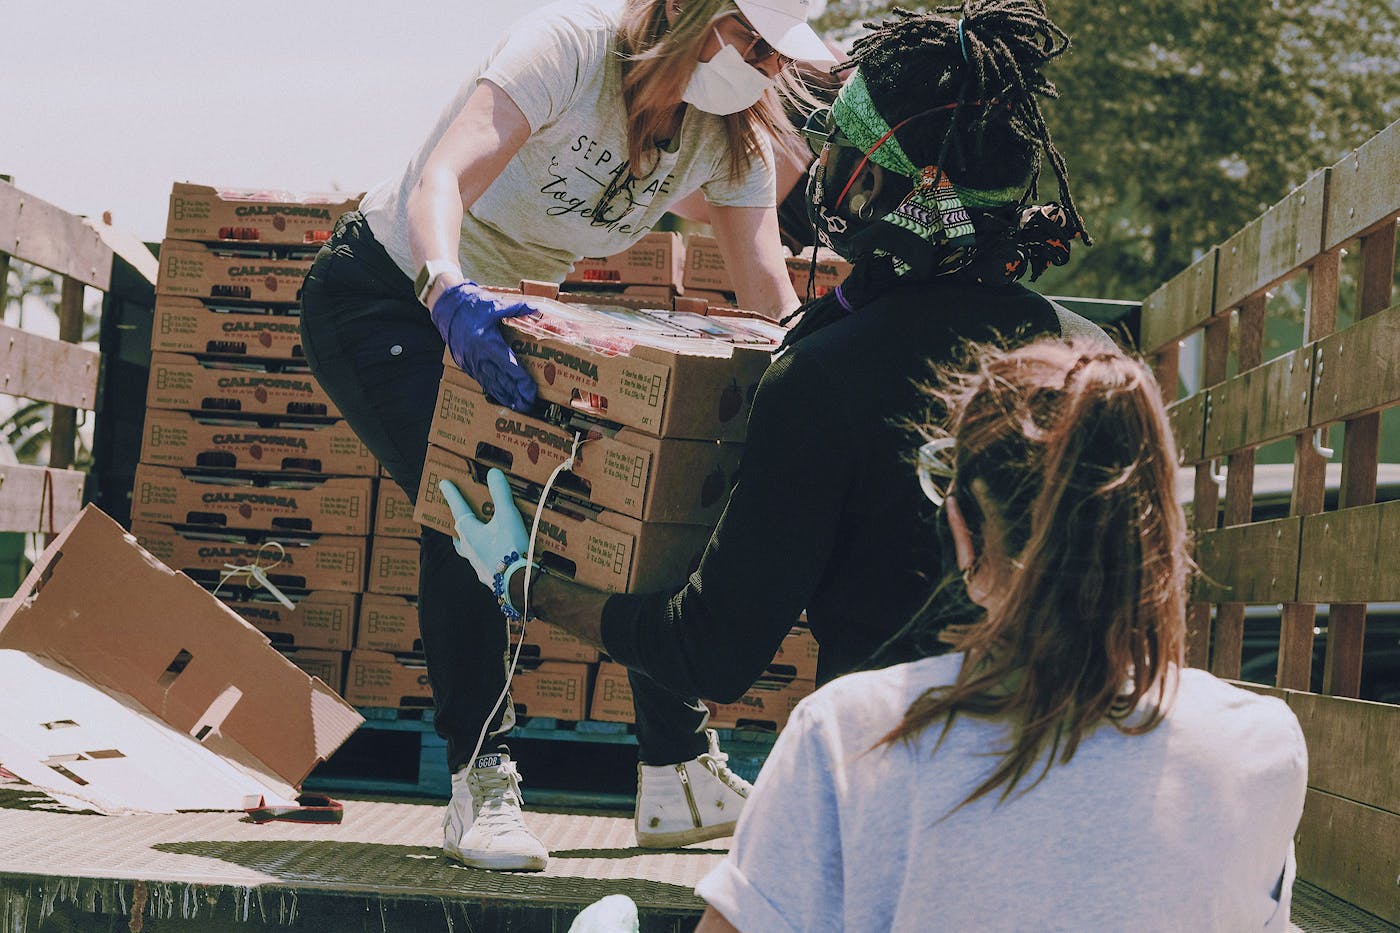 Volunteers emptying goods from the back of a truck